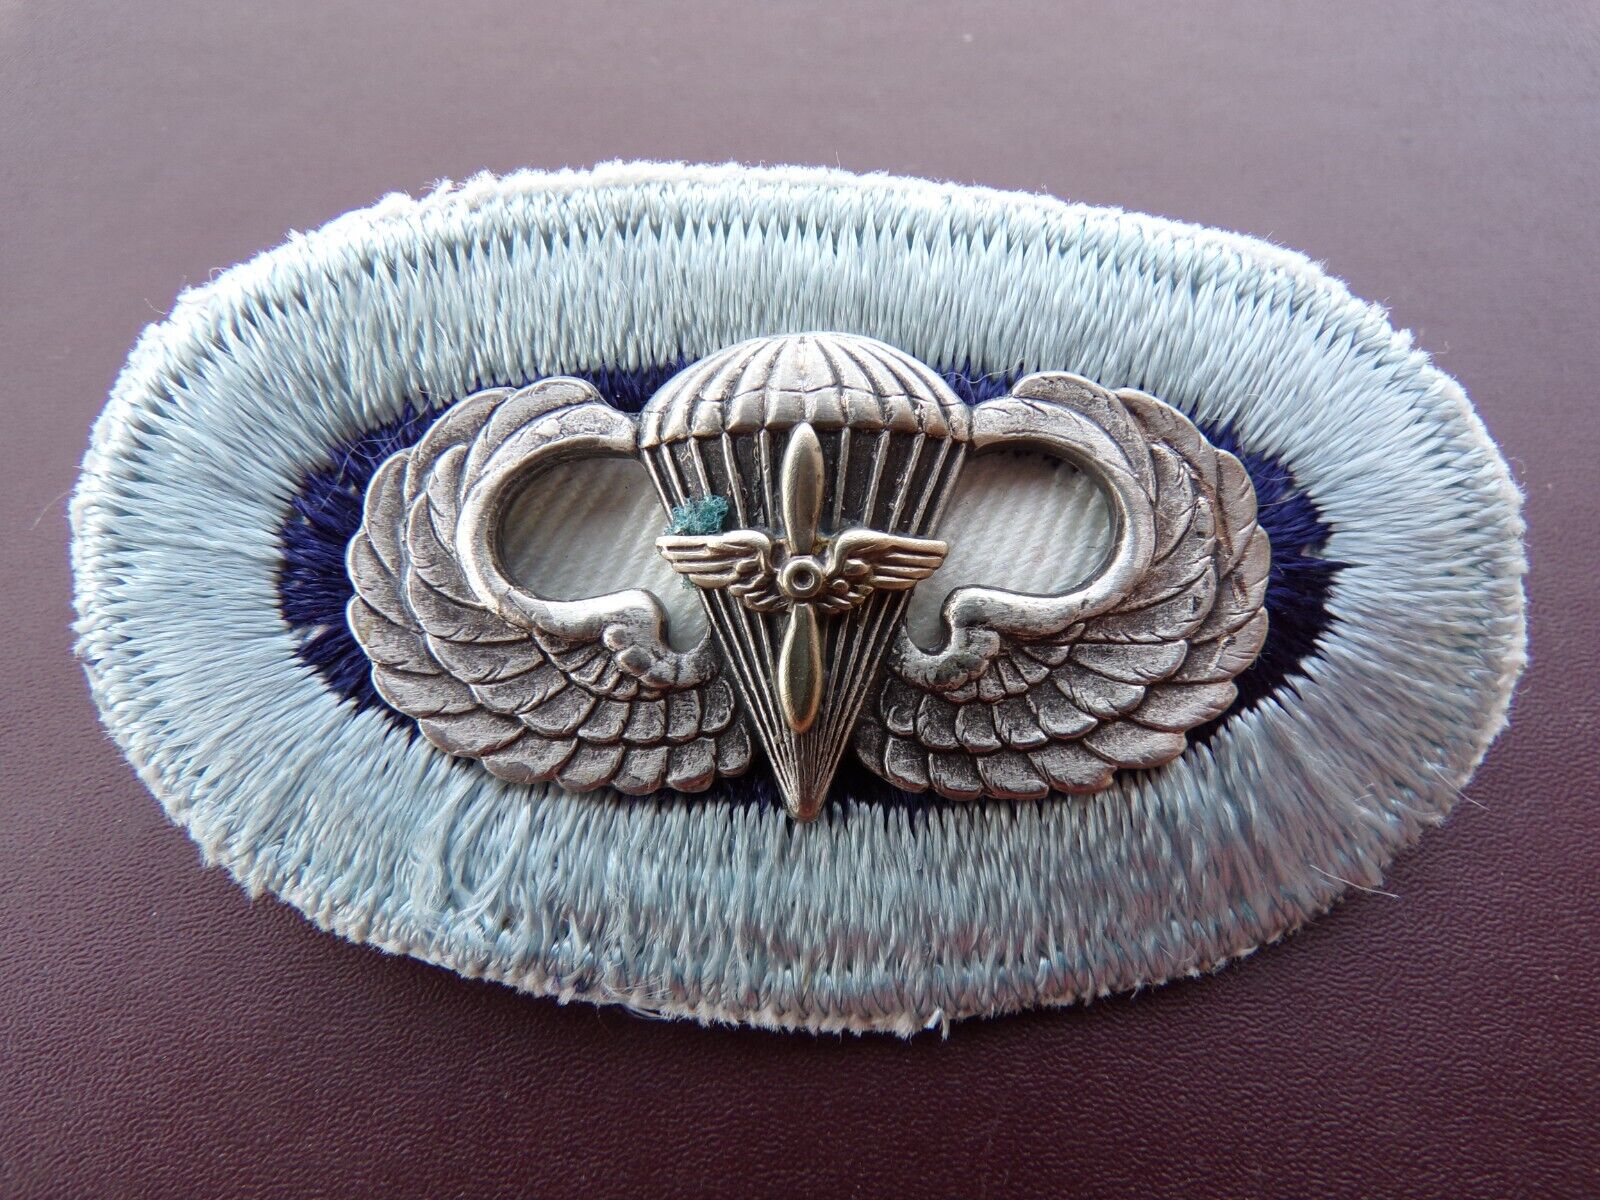 101st Aviation Airborne Jump Wing Oval Patch Badge Pin Military Vintage Rare Avn